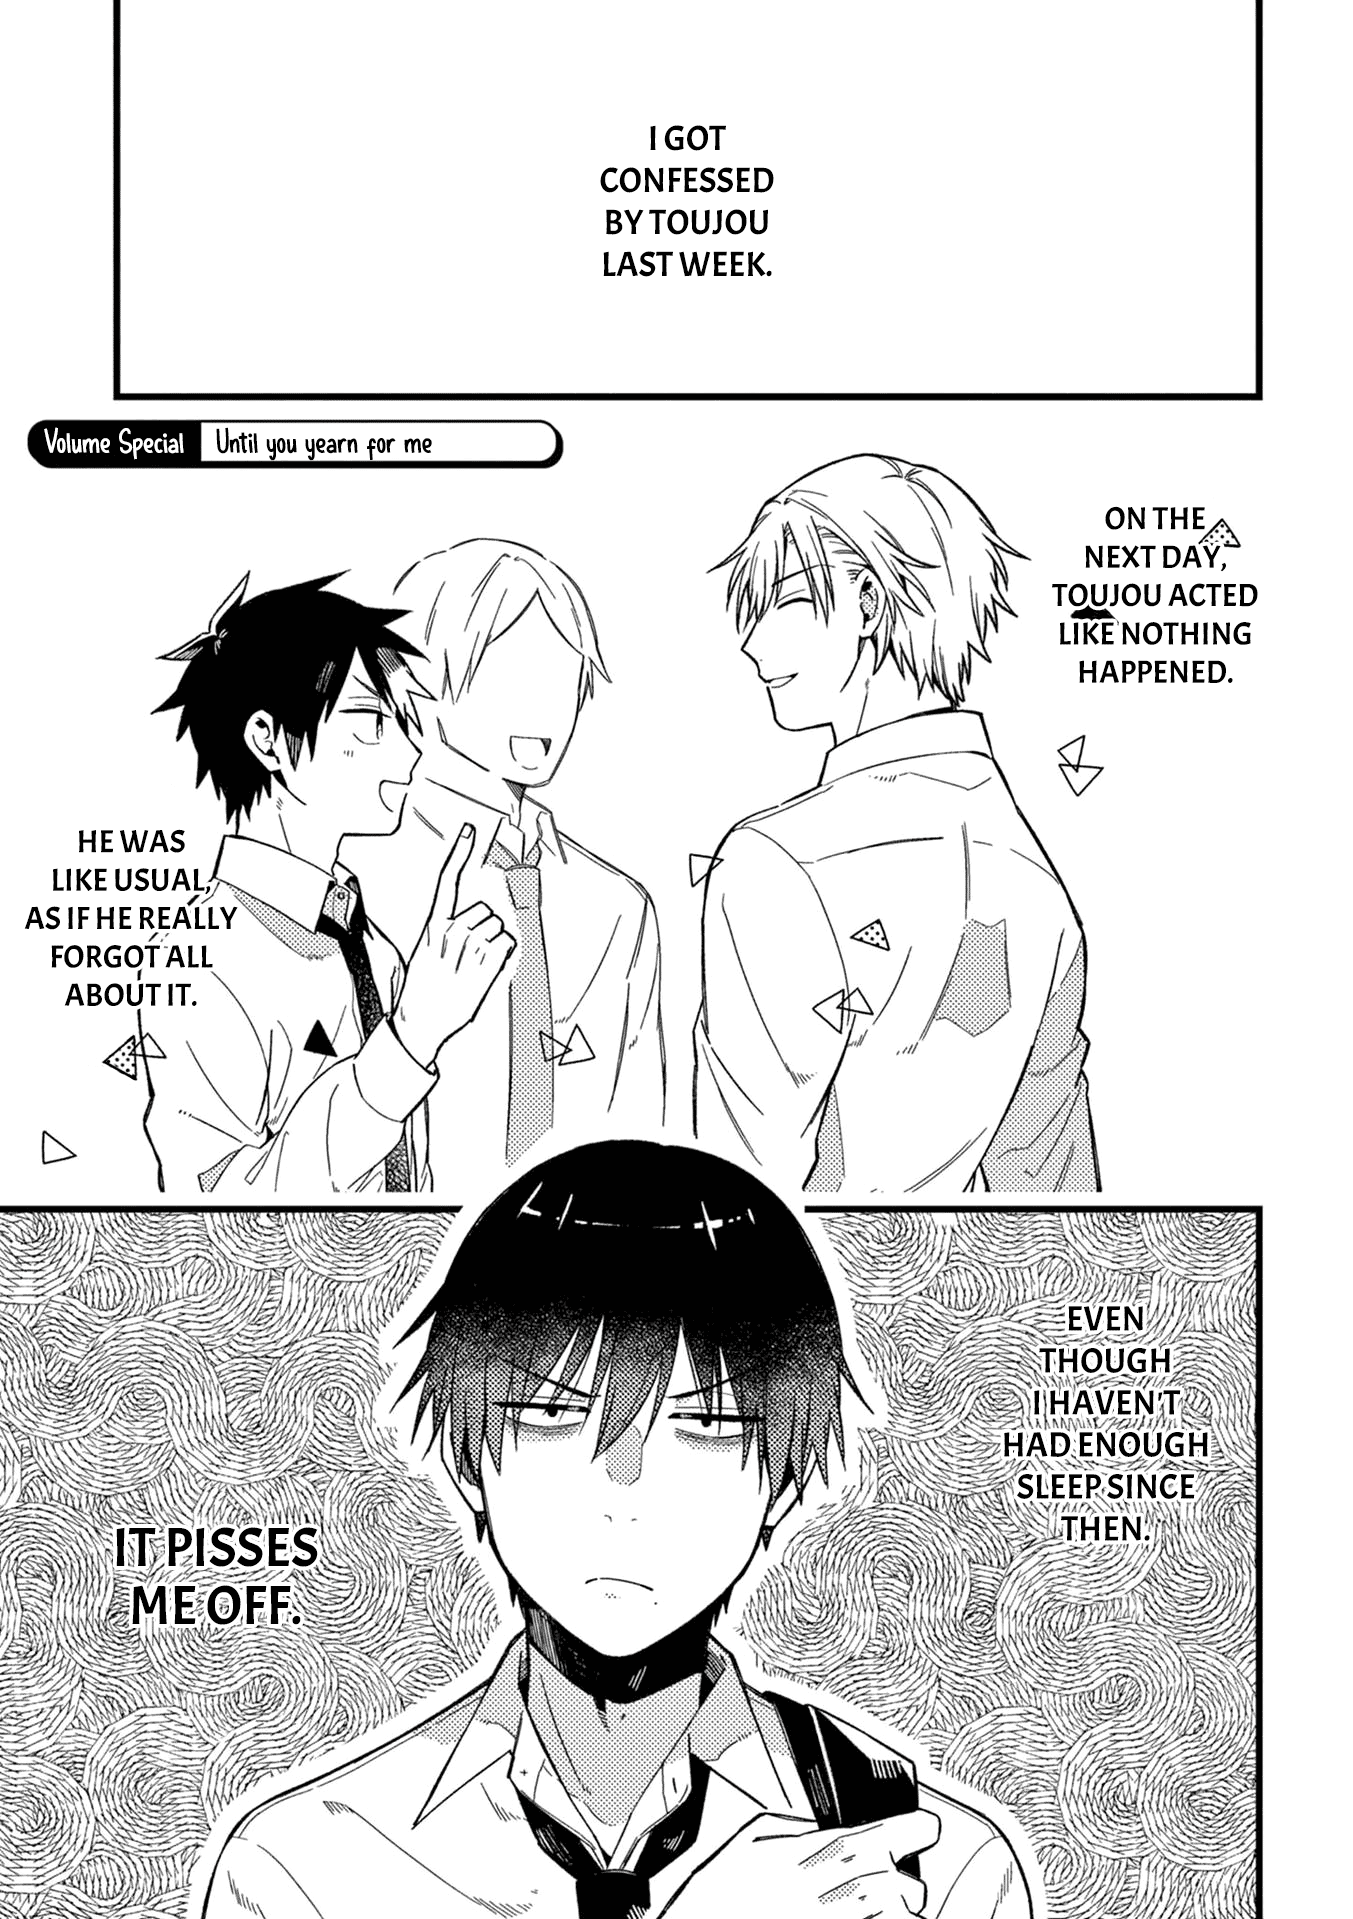 A World Where Everything Definitely Becomes Bl Vs. The Man Who Definitely Doesn't Want To Be In A Bl Vol.2 Chapter 35.5: Volume Special: Until You Yearn For Me - Picture 2